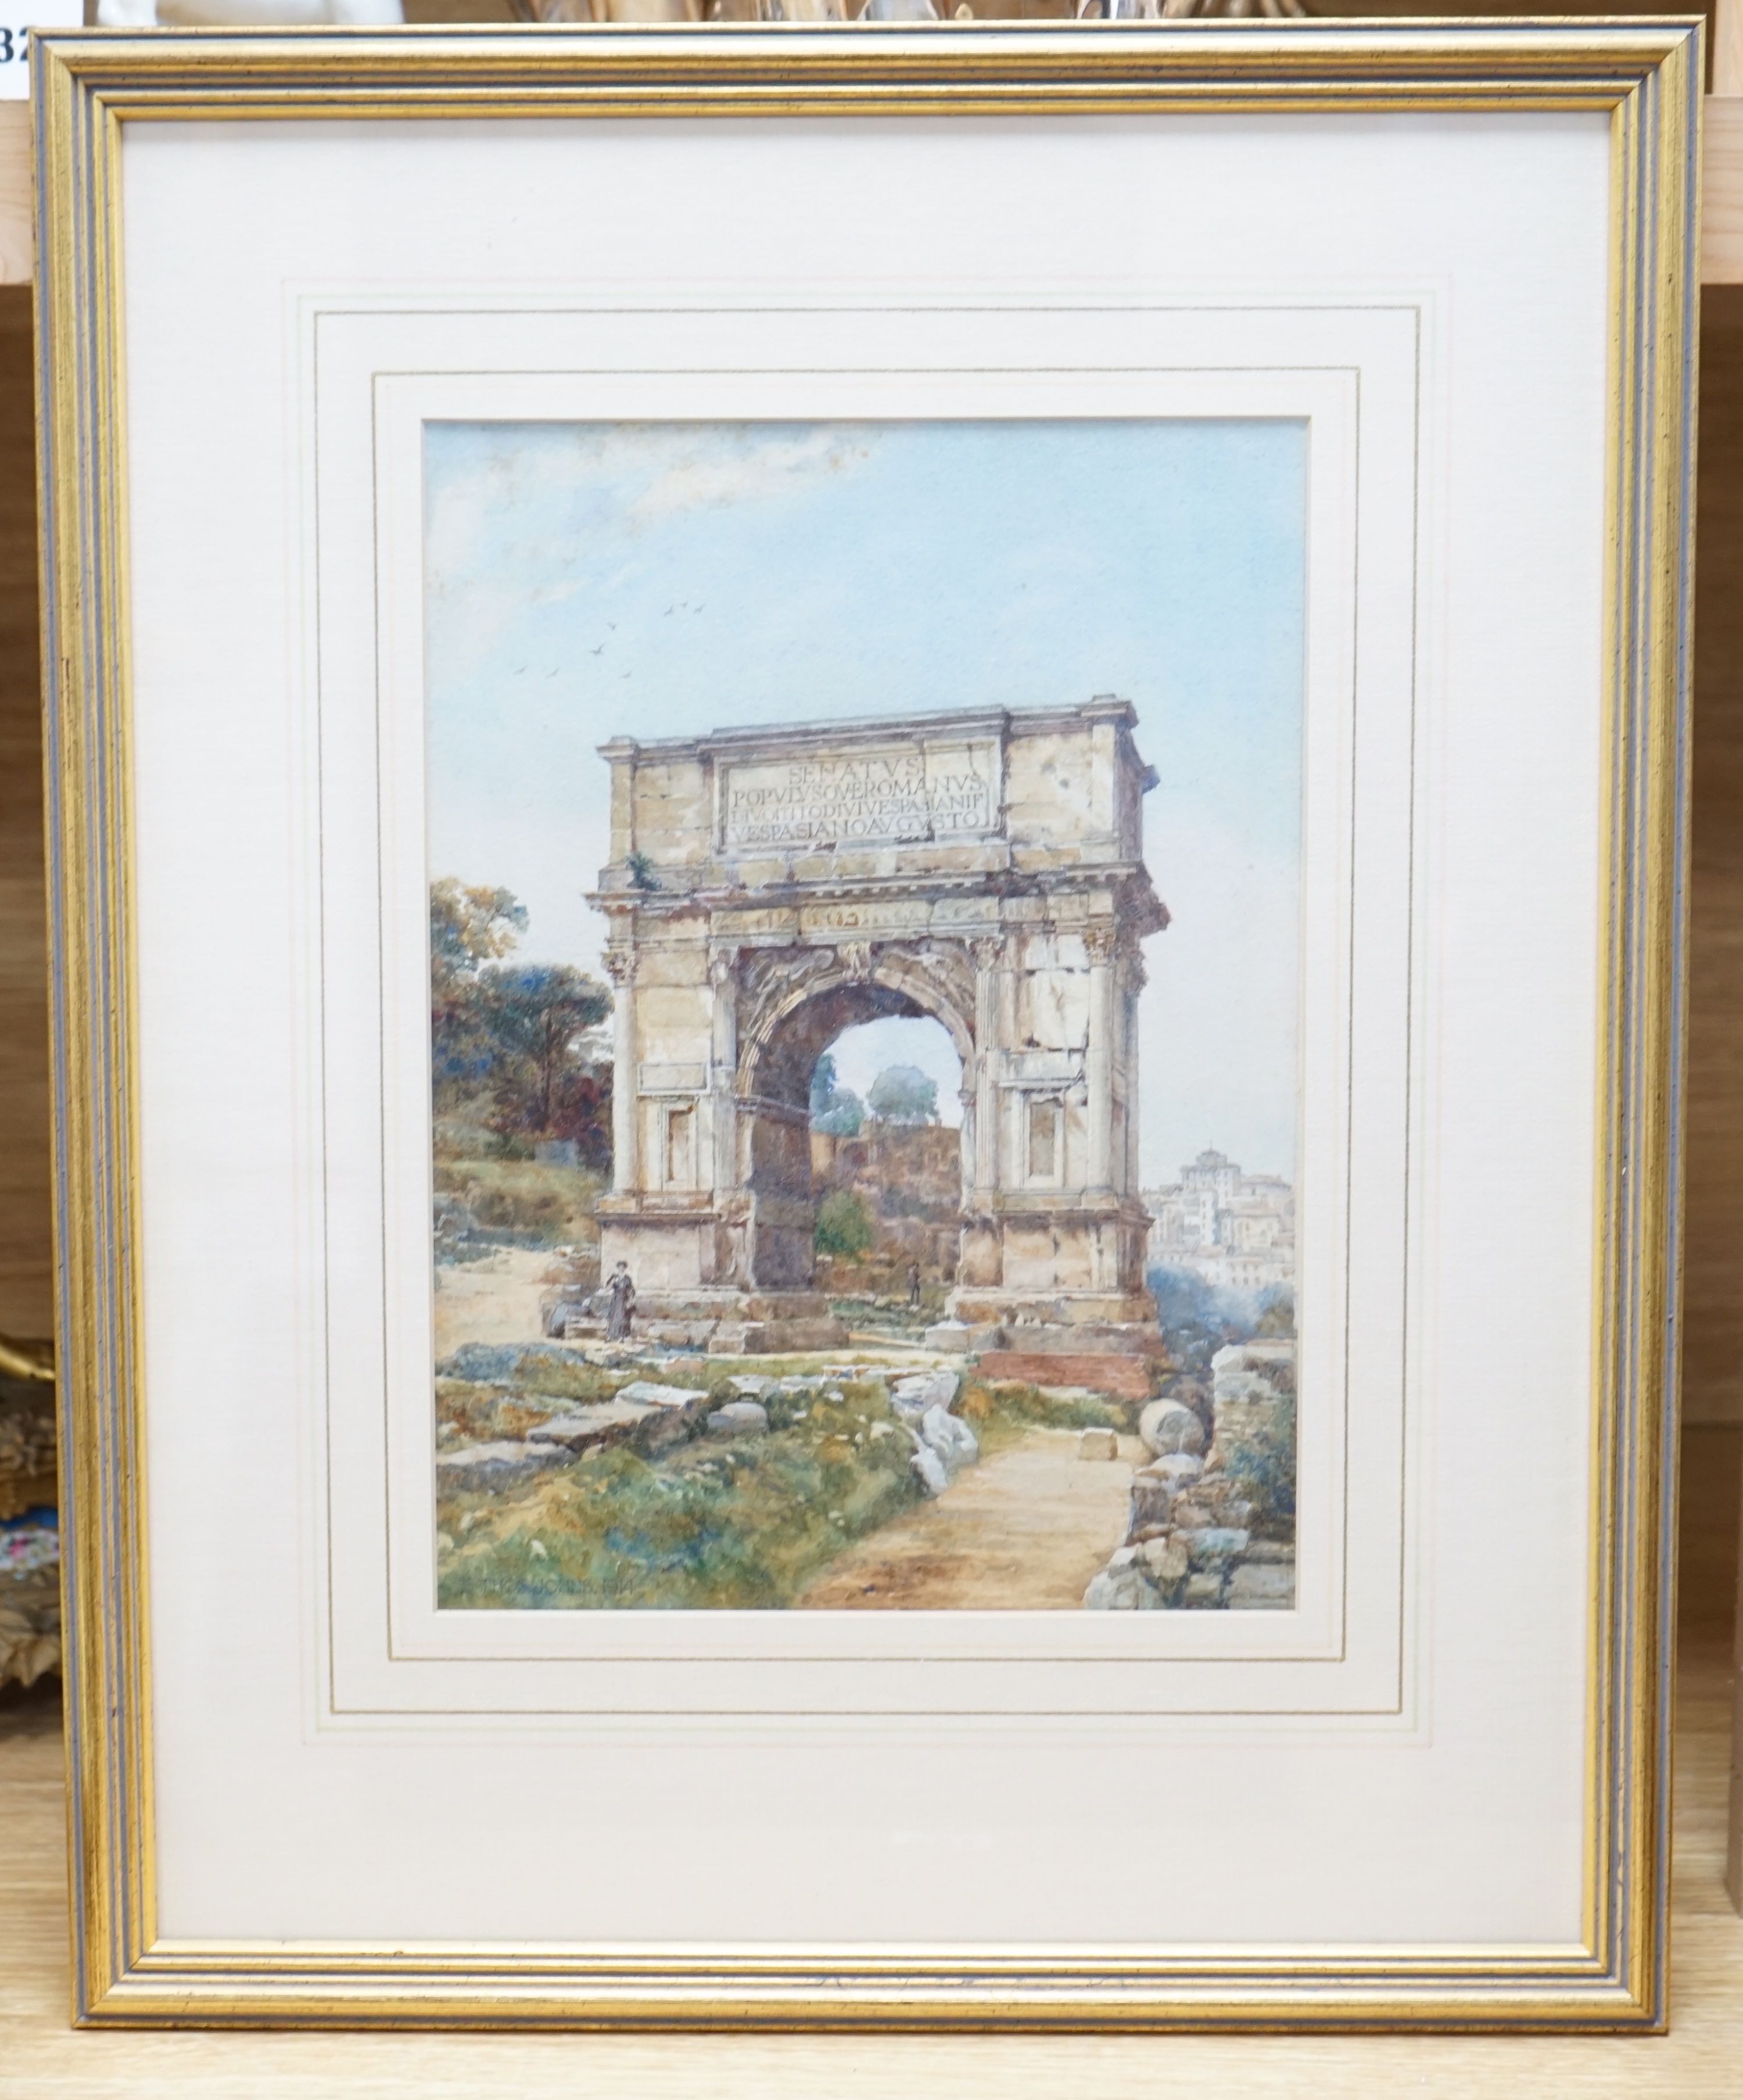 Edwin Thomas Johns (1862-1947), watercolour, 'The Arch of Titus, Rome', signed, 29 x 21cm - Image 3 of 5